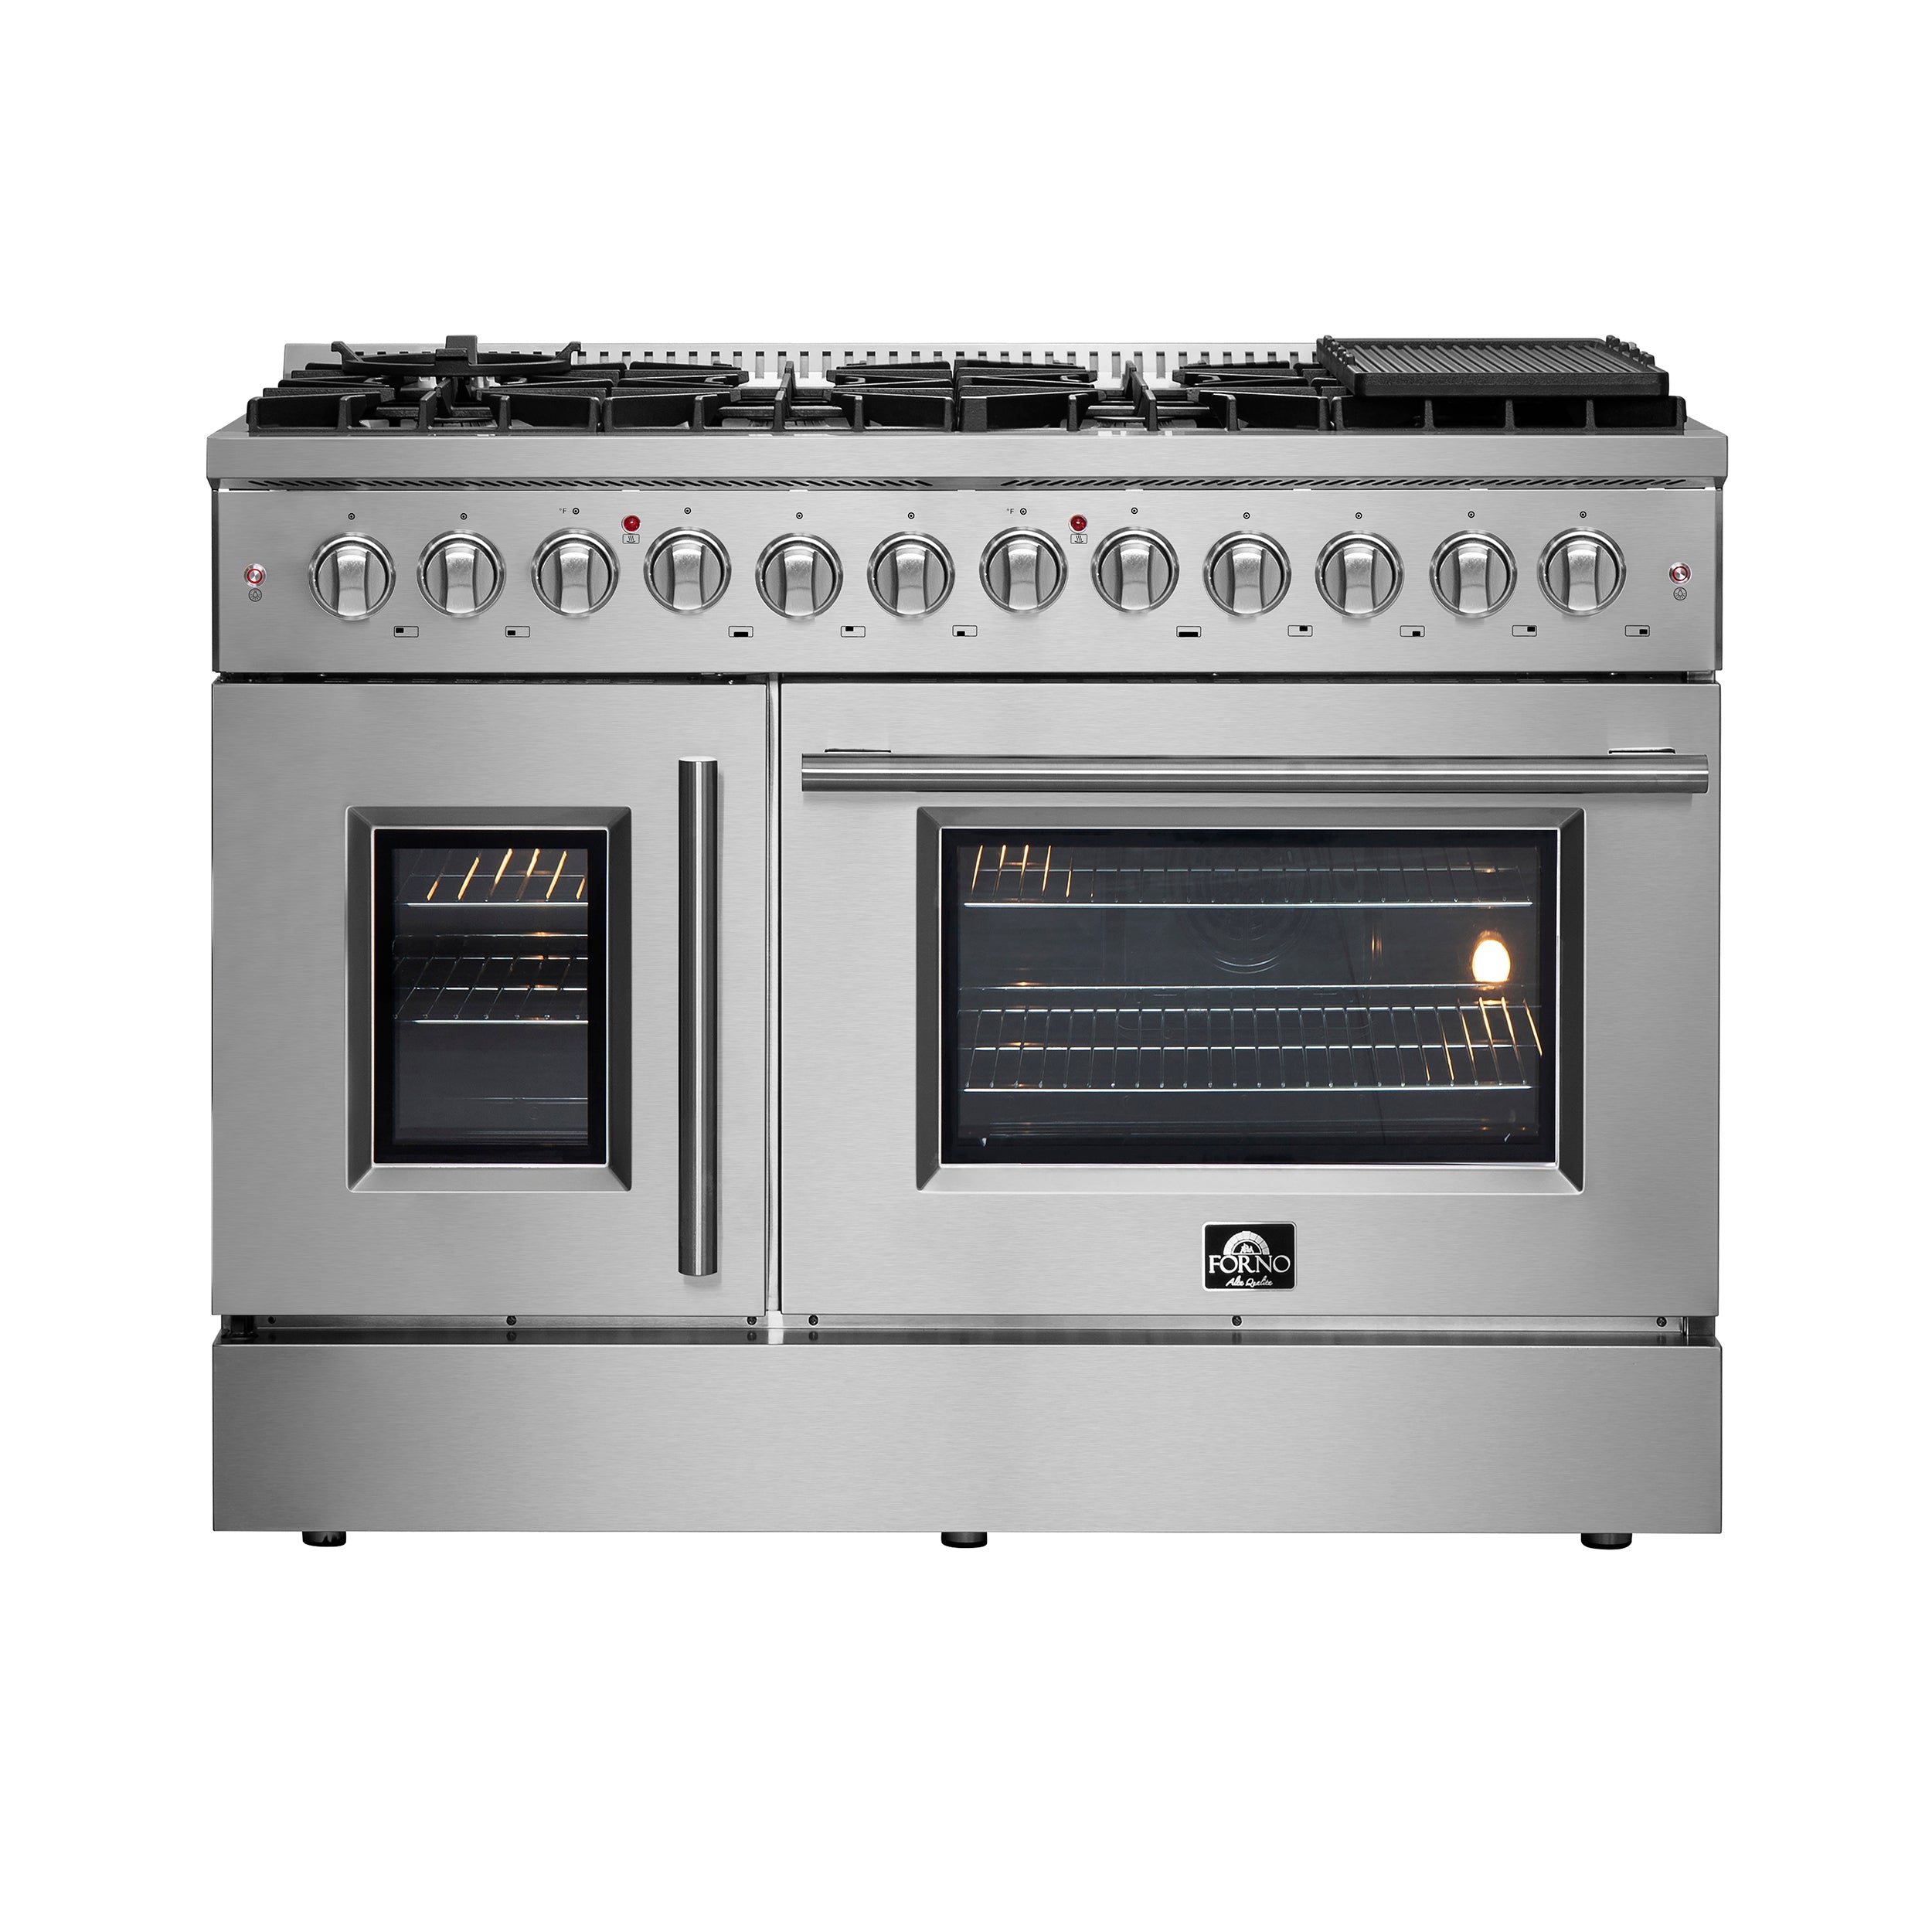 Forno Galiano 48 in. 6.58 cu. ft. Left Swing Door Freestanding Dual Fuel Range with Gas Stove and Electric Oven in Stainless Steel (FFSGS6356-48)